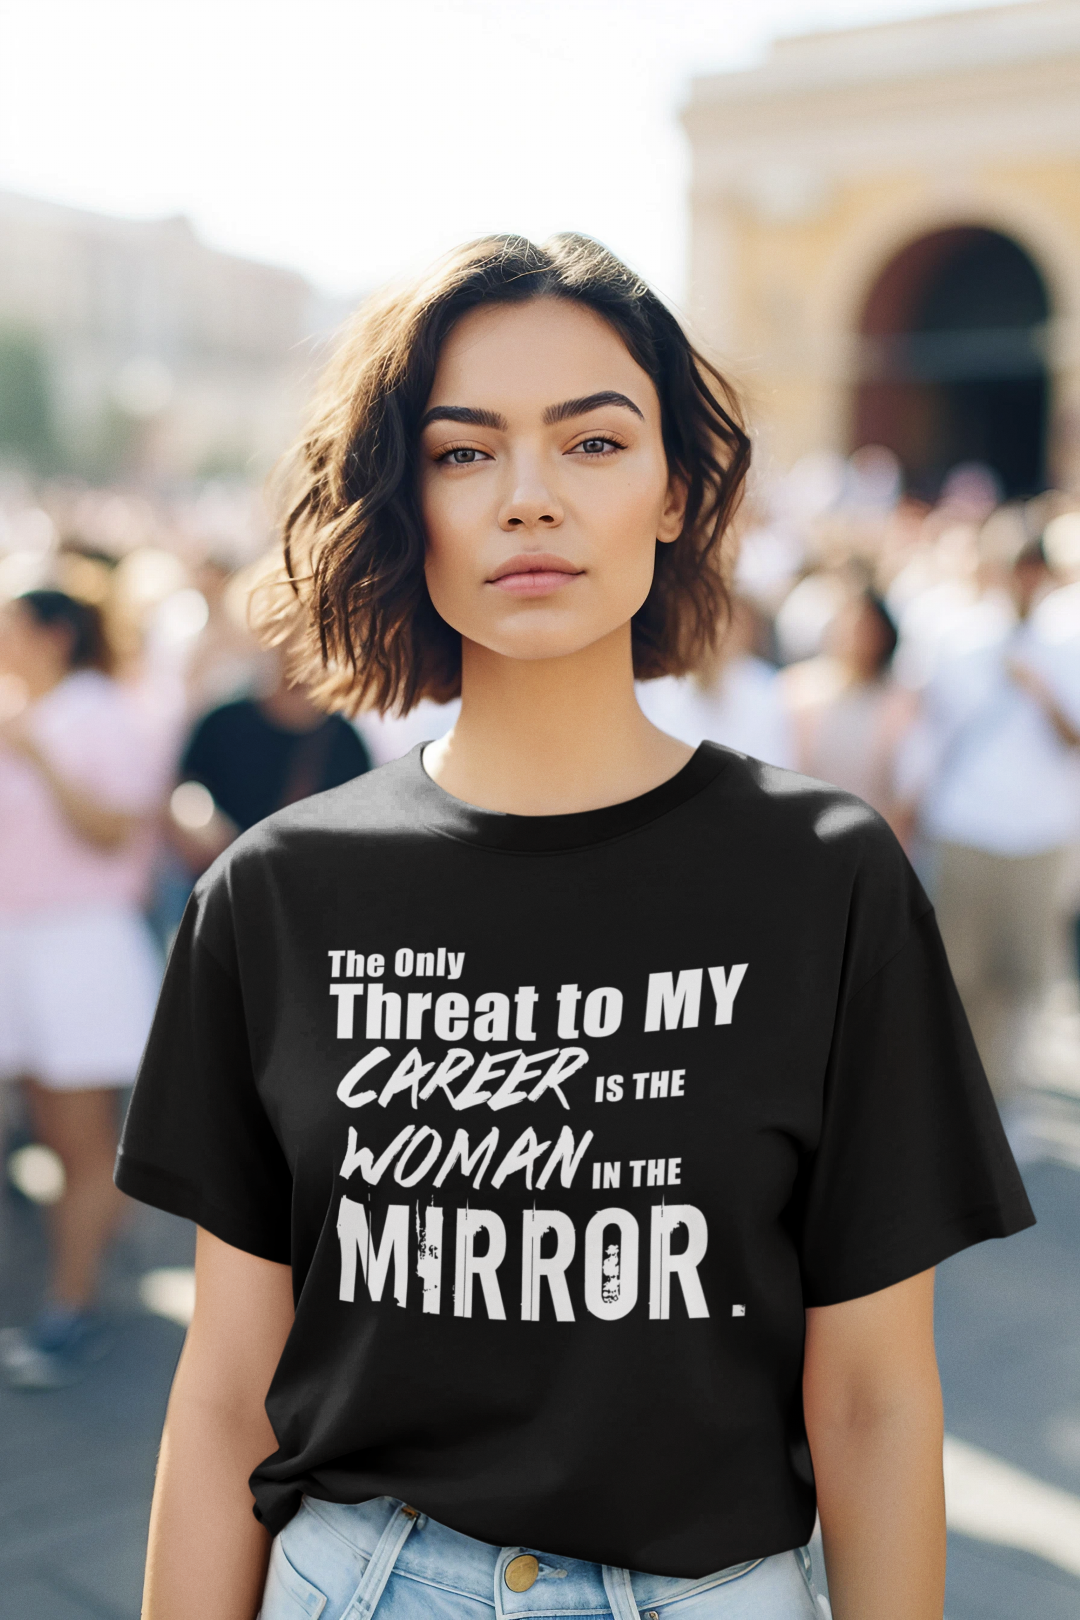 The Only Threat to My Career is the Man in the Mirror Motivational T Shirt